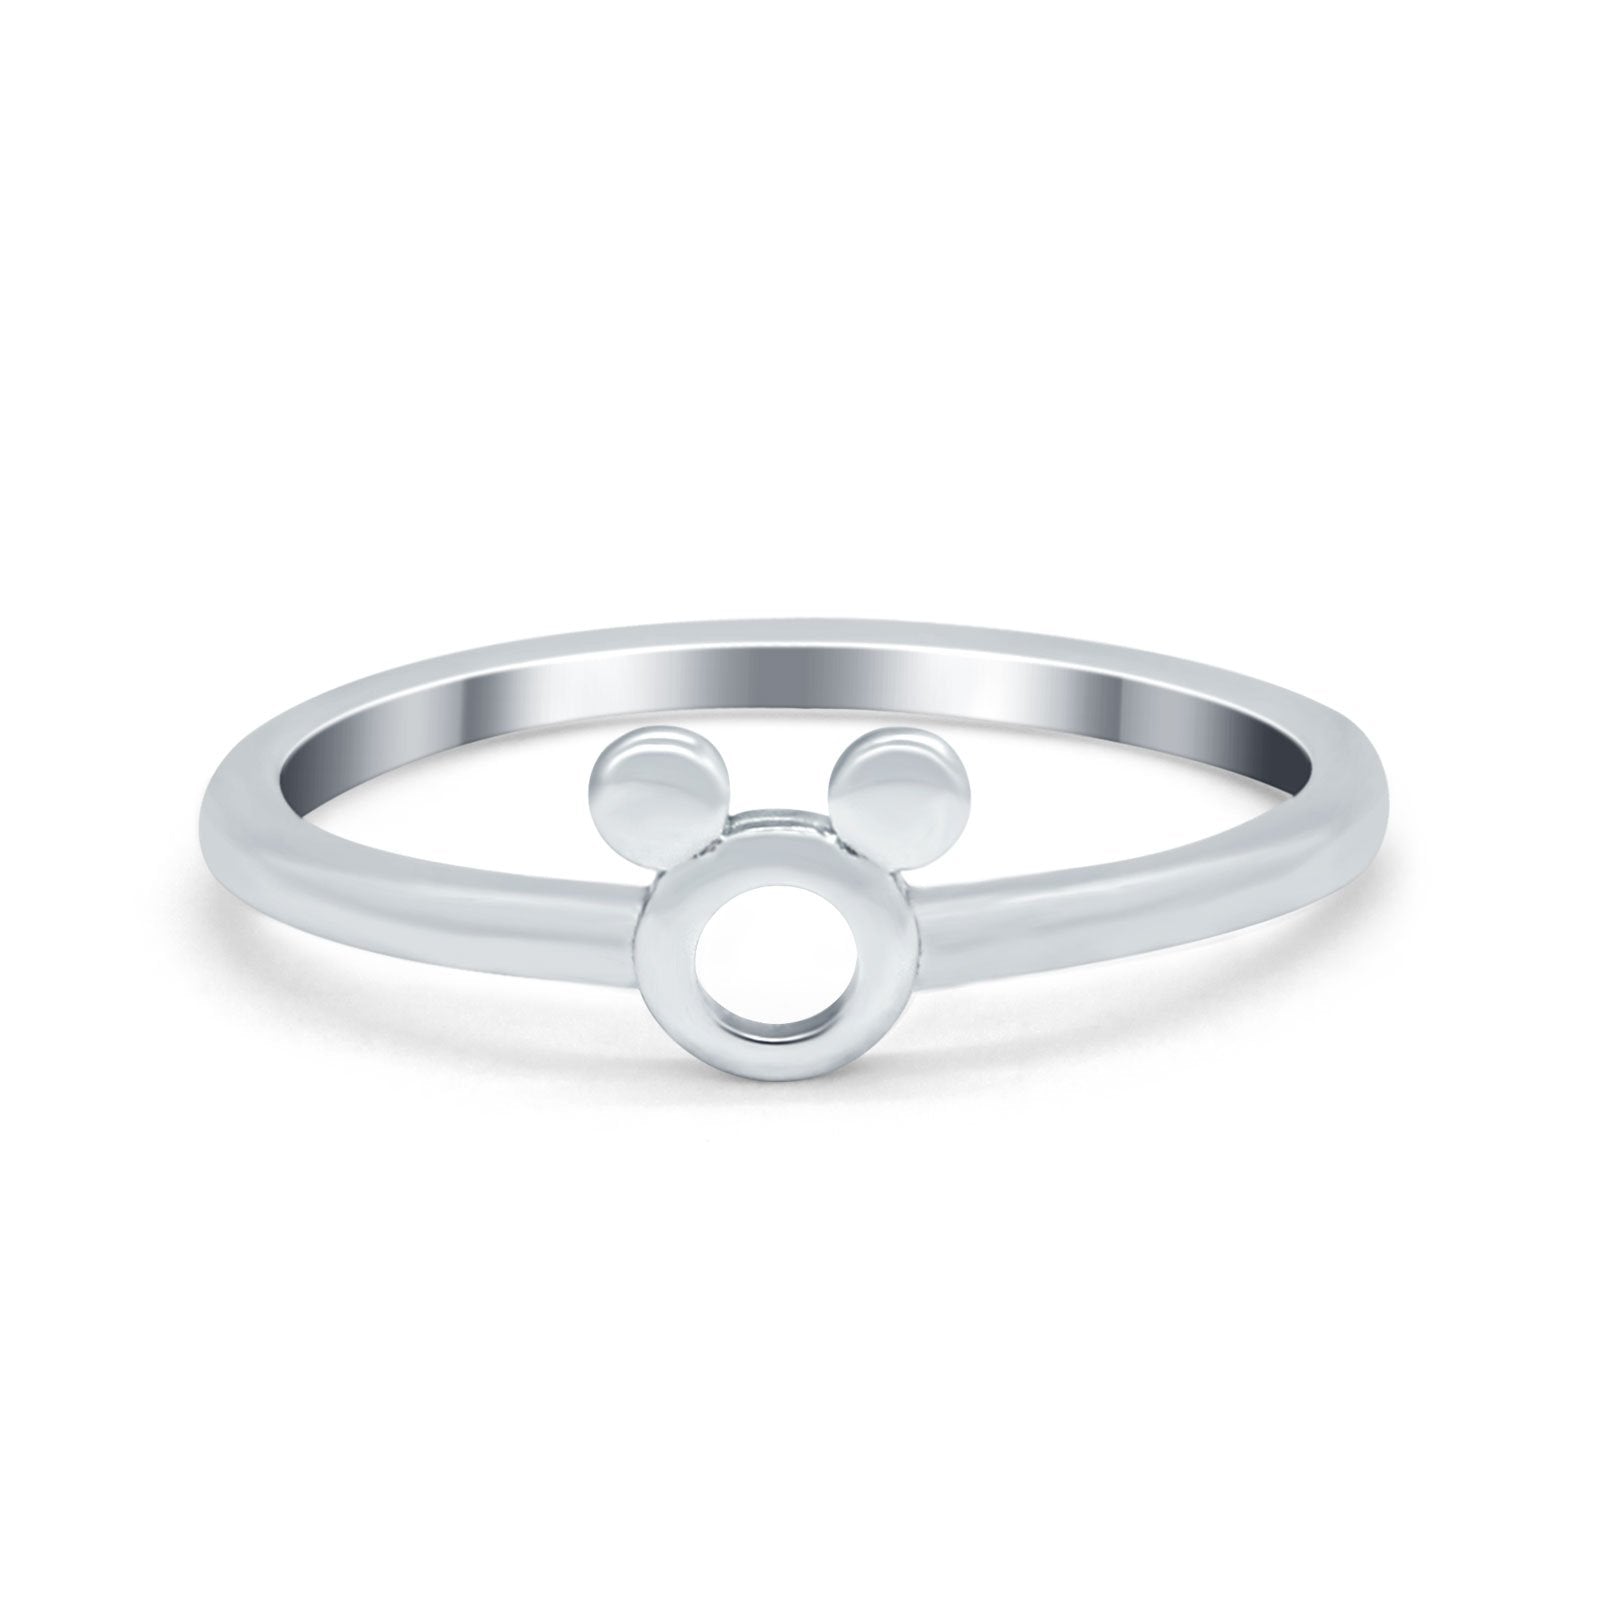 Petite Dainty Plain Rings Band Round 925 Sterling Silver